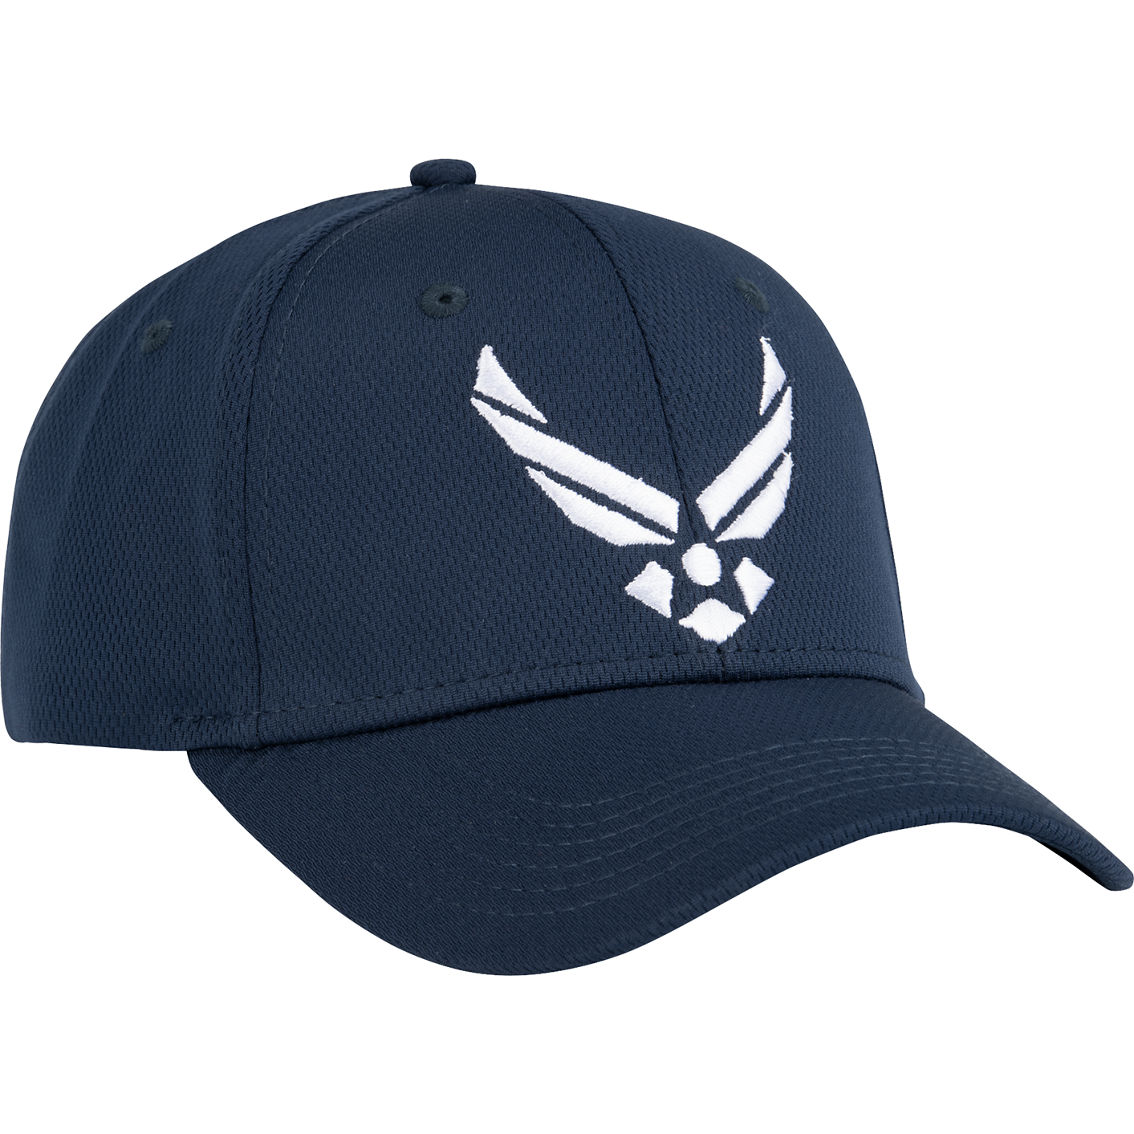 Blync Air Force Wings Twill Mid Profile Cap - Image 2 of 3